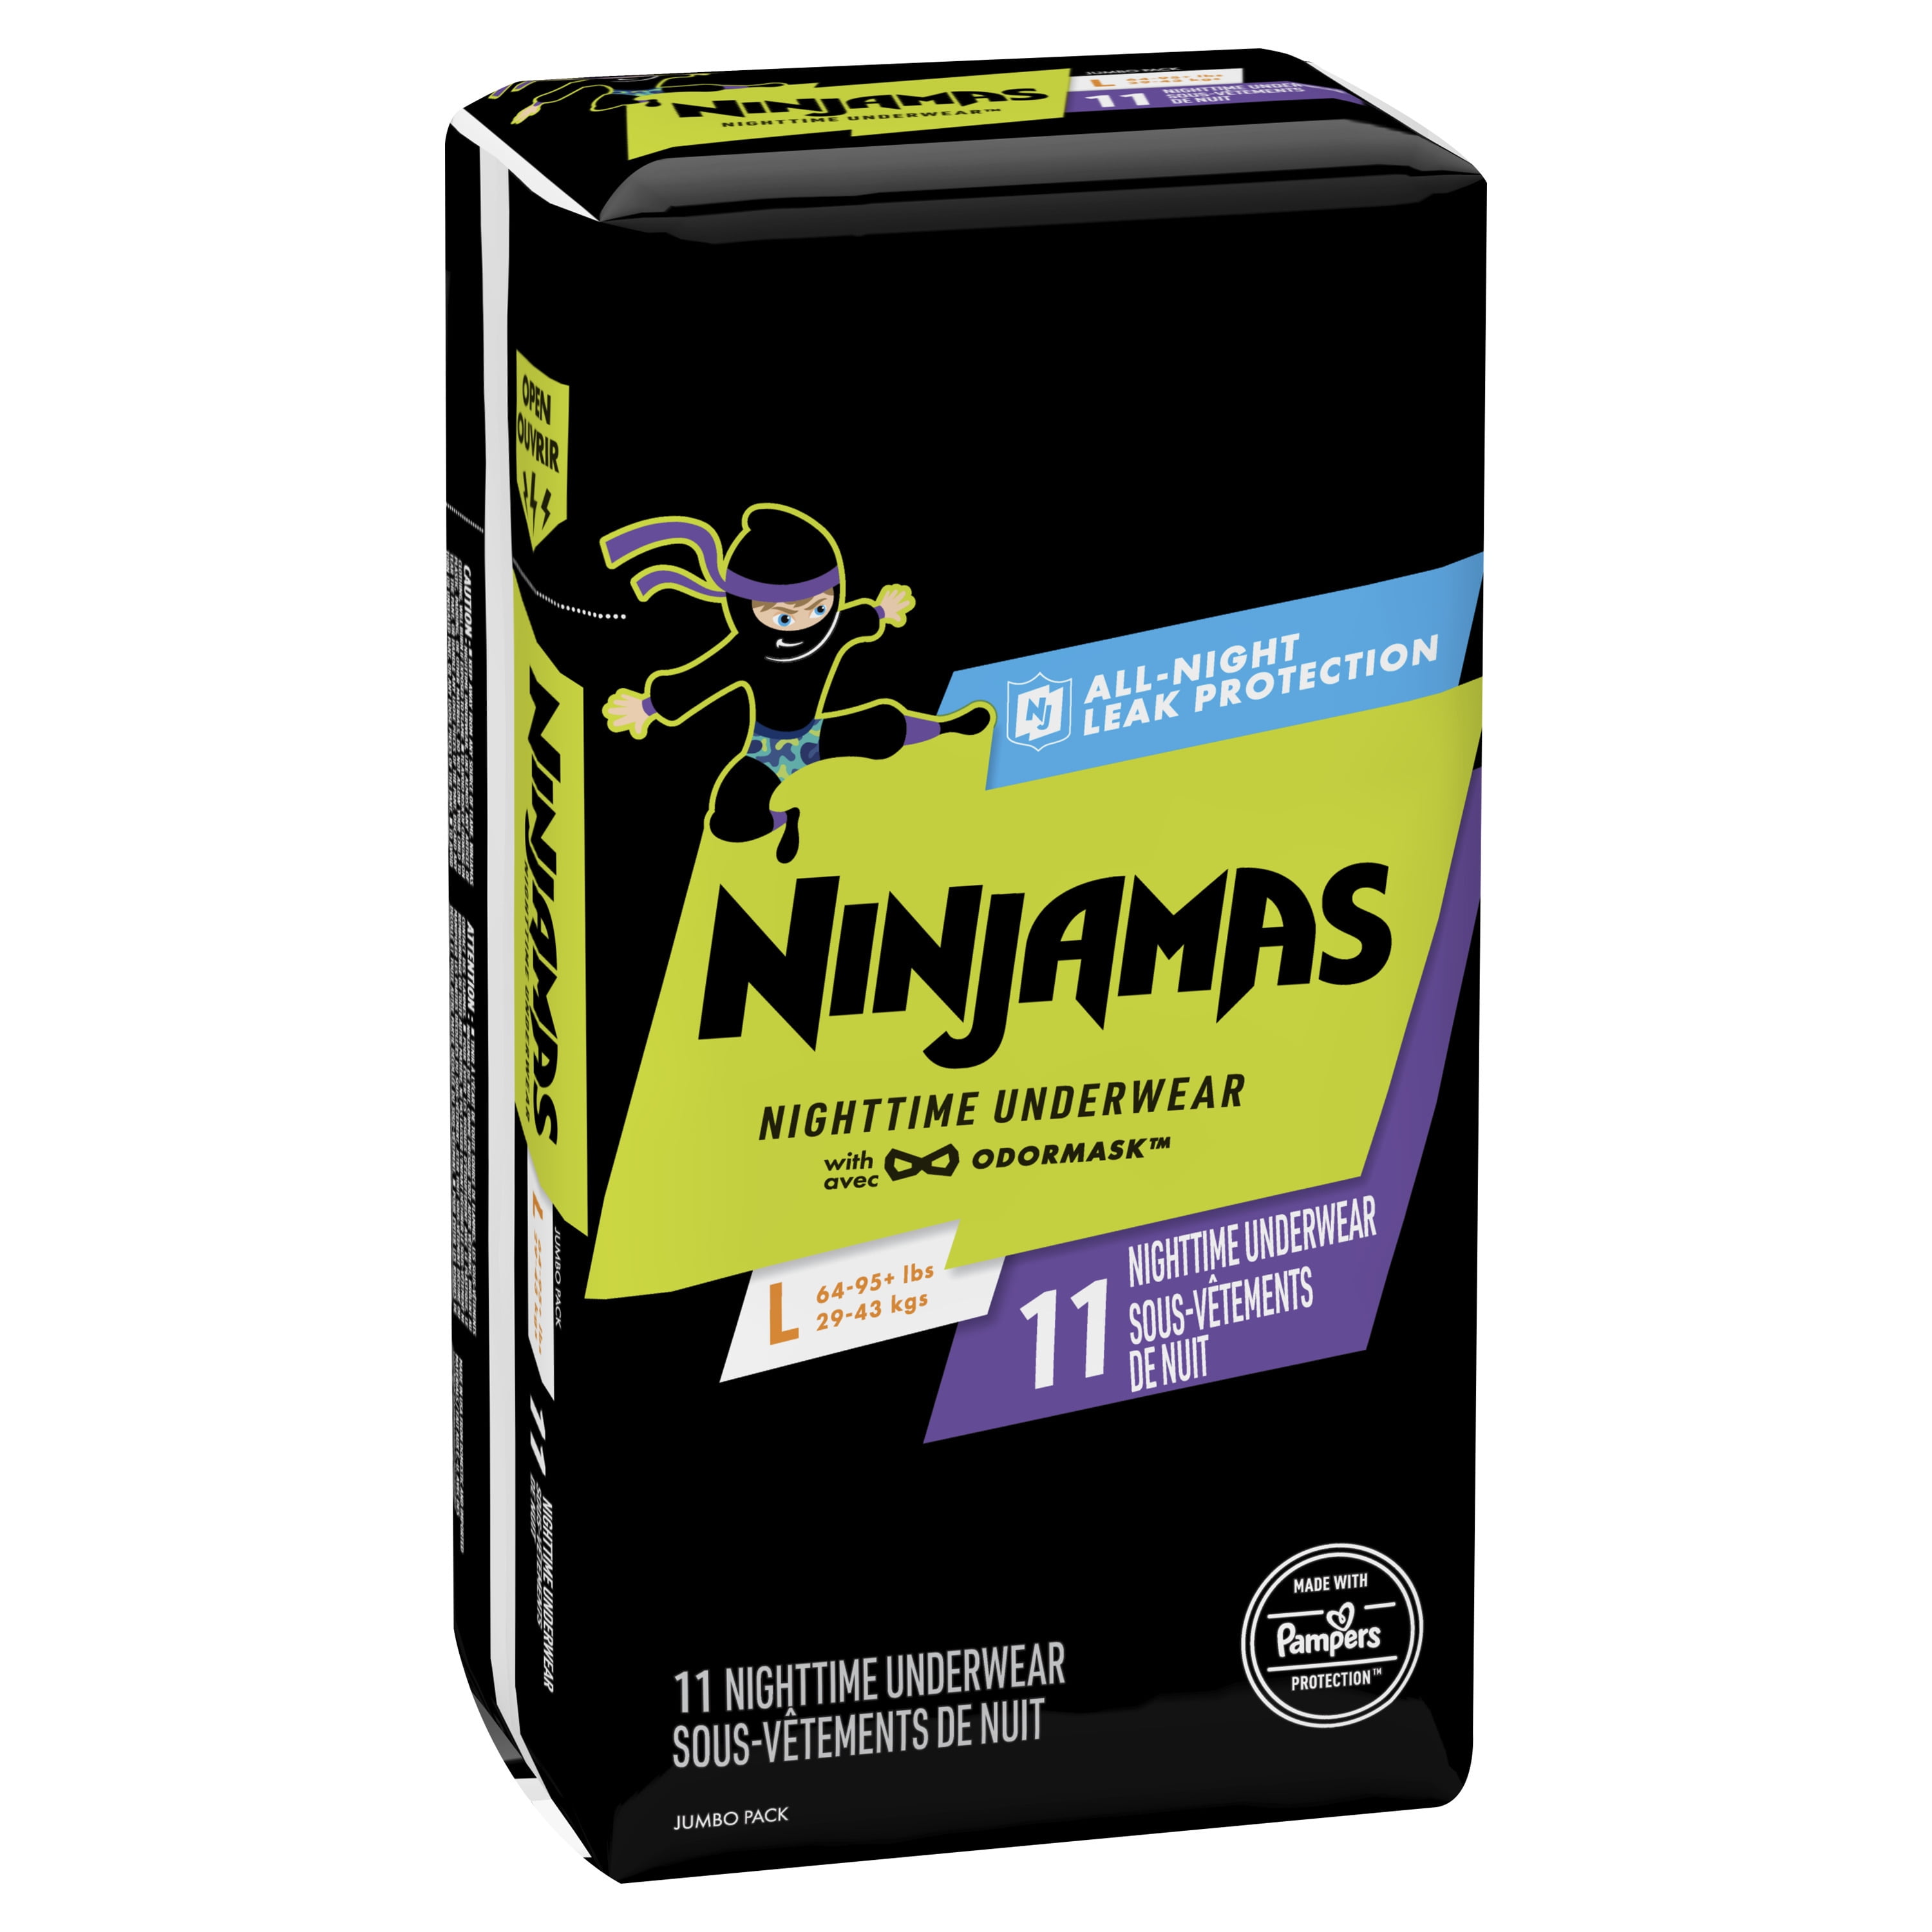  Pampers Ninjamas Nighttime Bedwetting Underwear Boys - Size S/M  (38-70 lbs), 44 Count (Packaging May Vary) : Everything Else